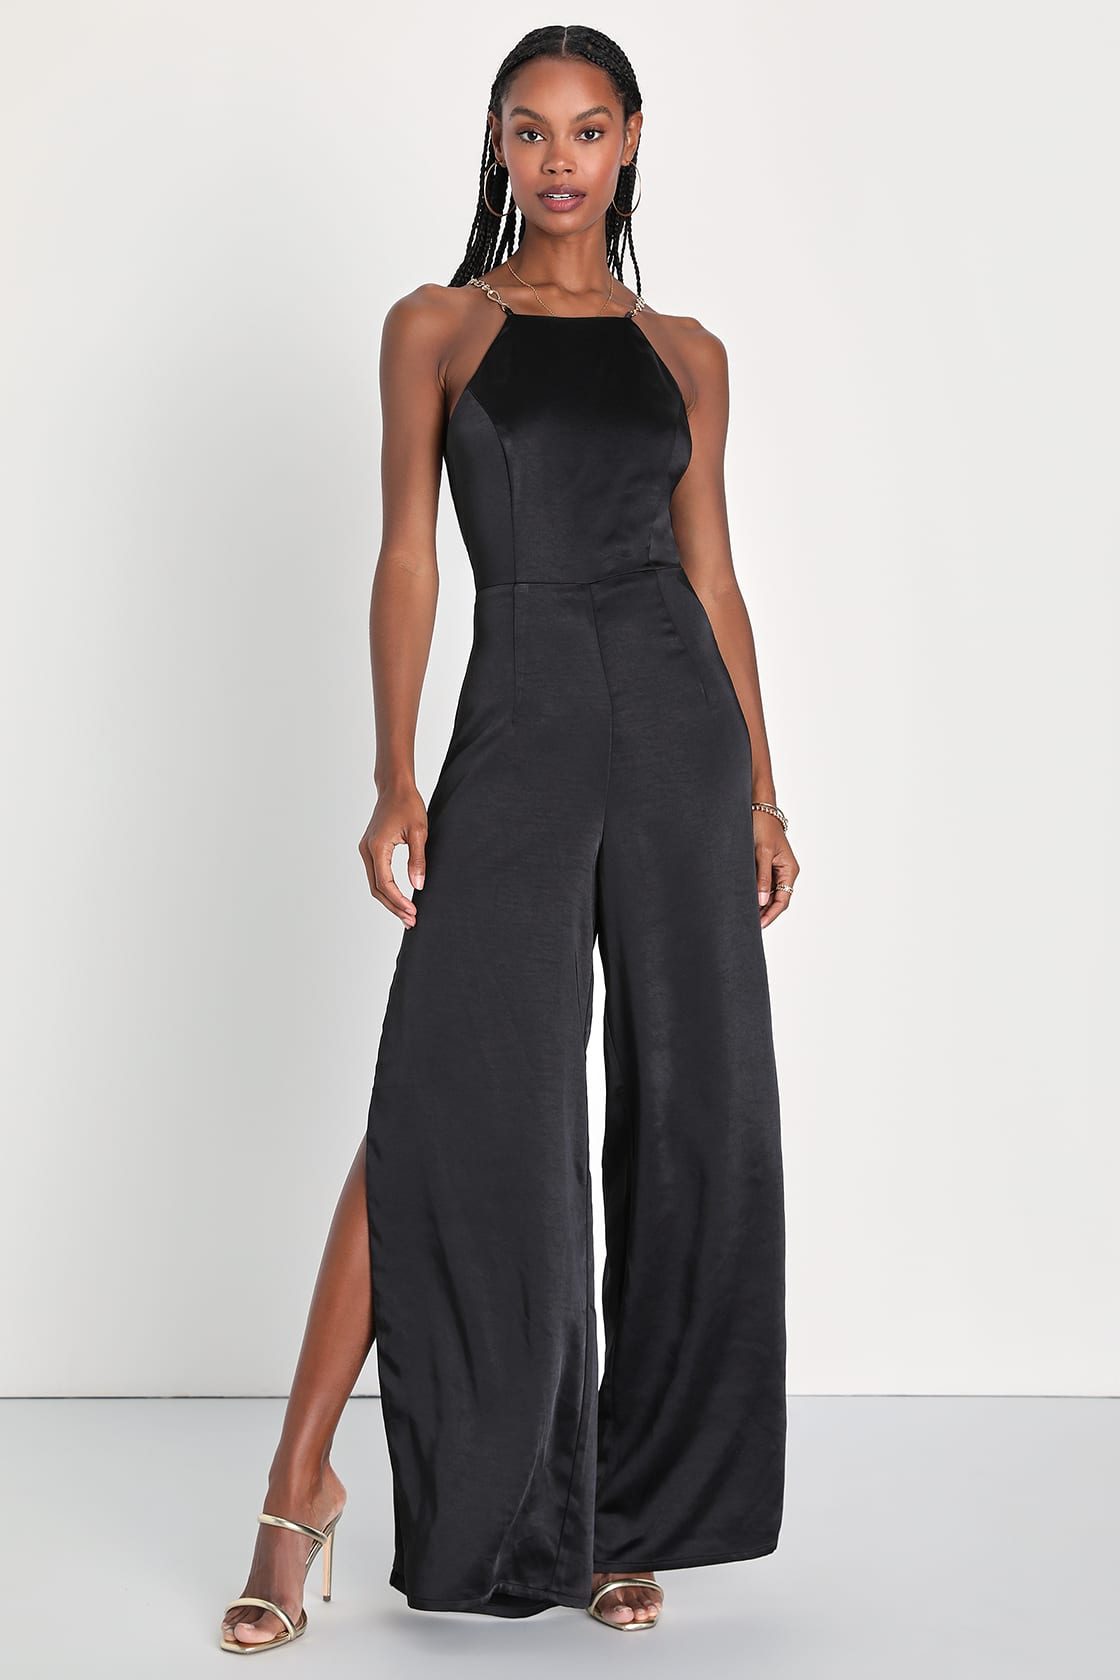 Glamorous Perfection Black Satin Chain Strap Backless Jumpsuit